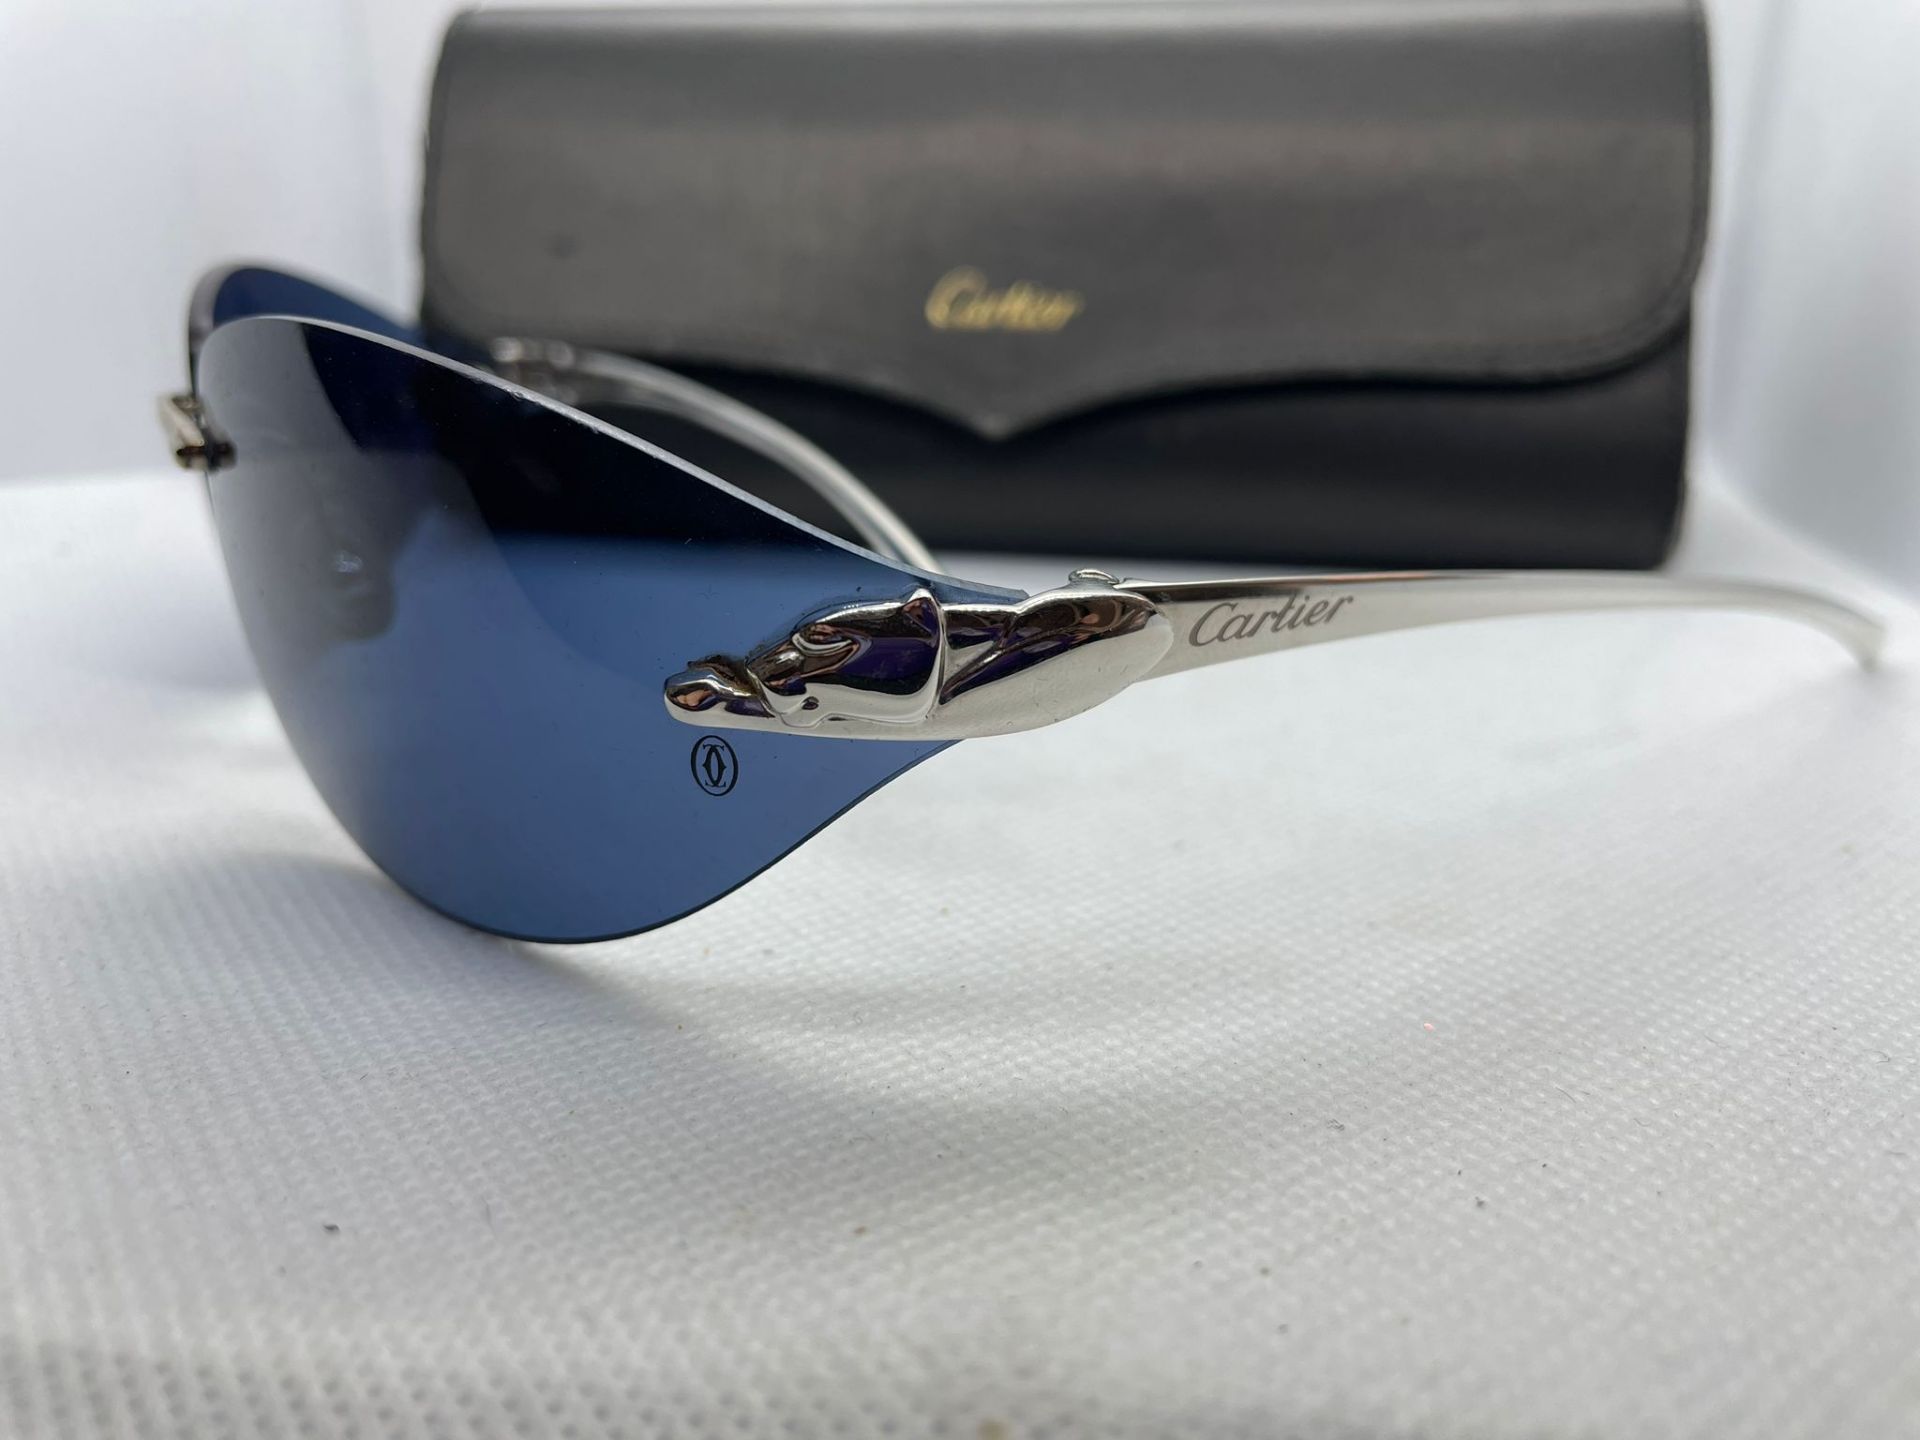 Cartier Panthere sunglasses - Image 5 of 6